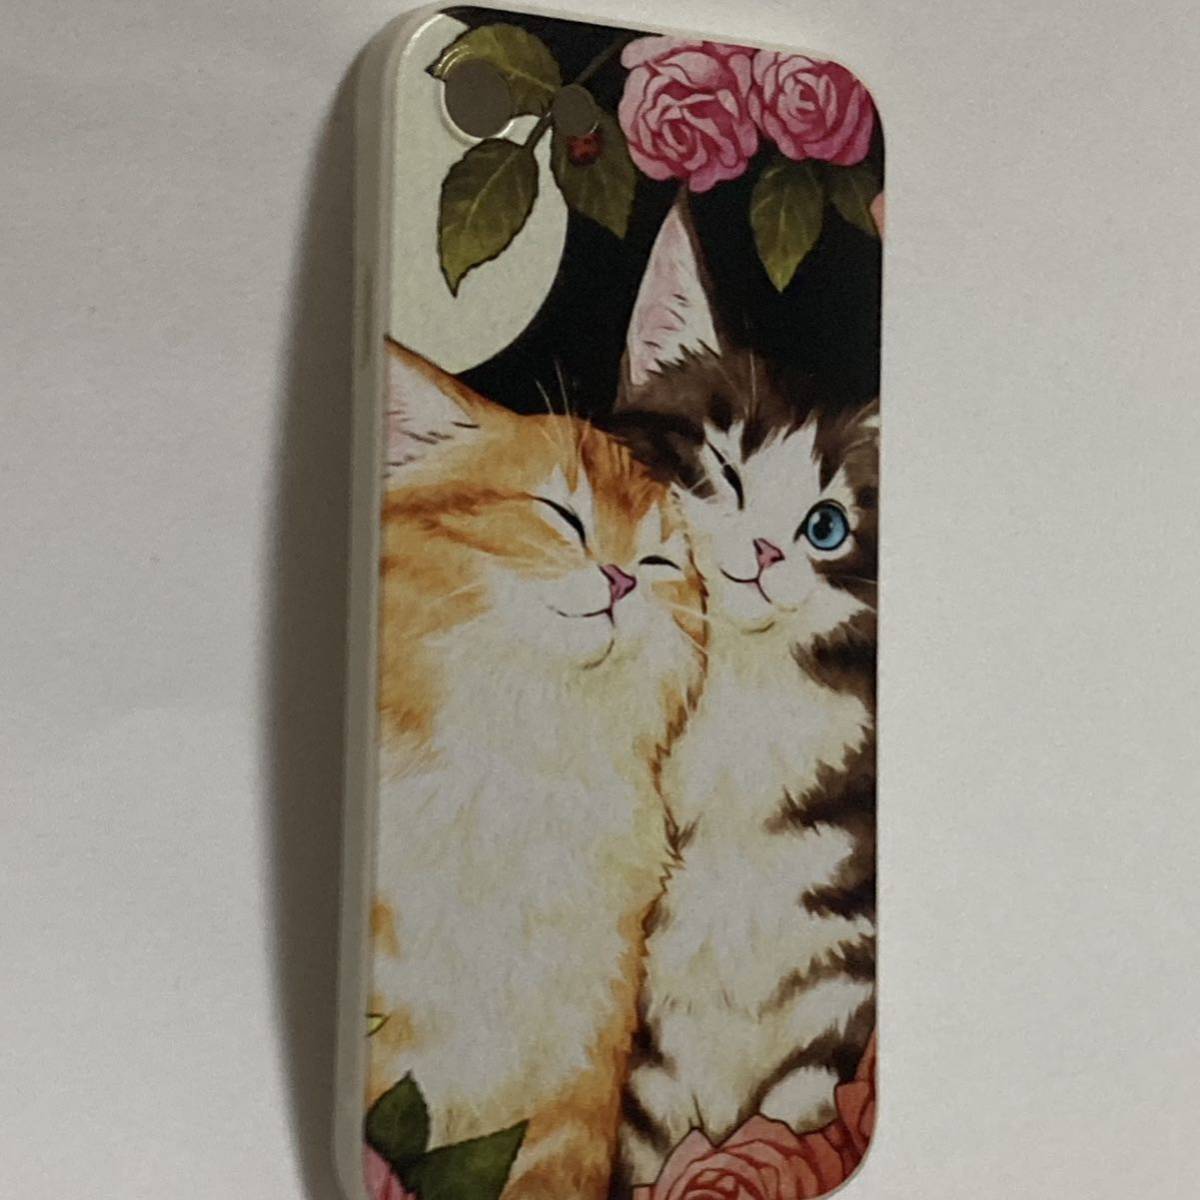  new goods iphone case 7/8/SE2.3 for cat. character stylish illustration beautiful lovely animal Rav Rav picture manner cat cup ru love 